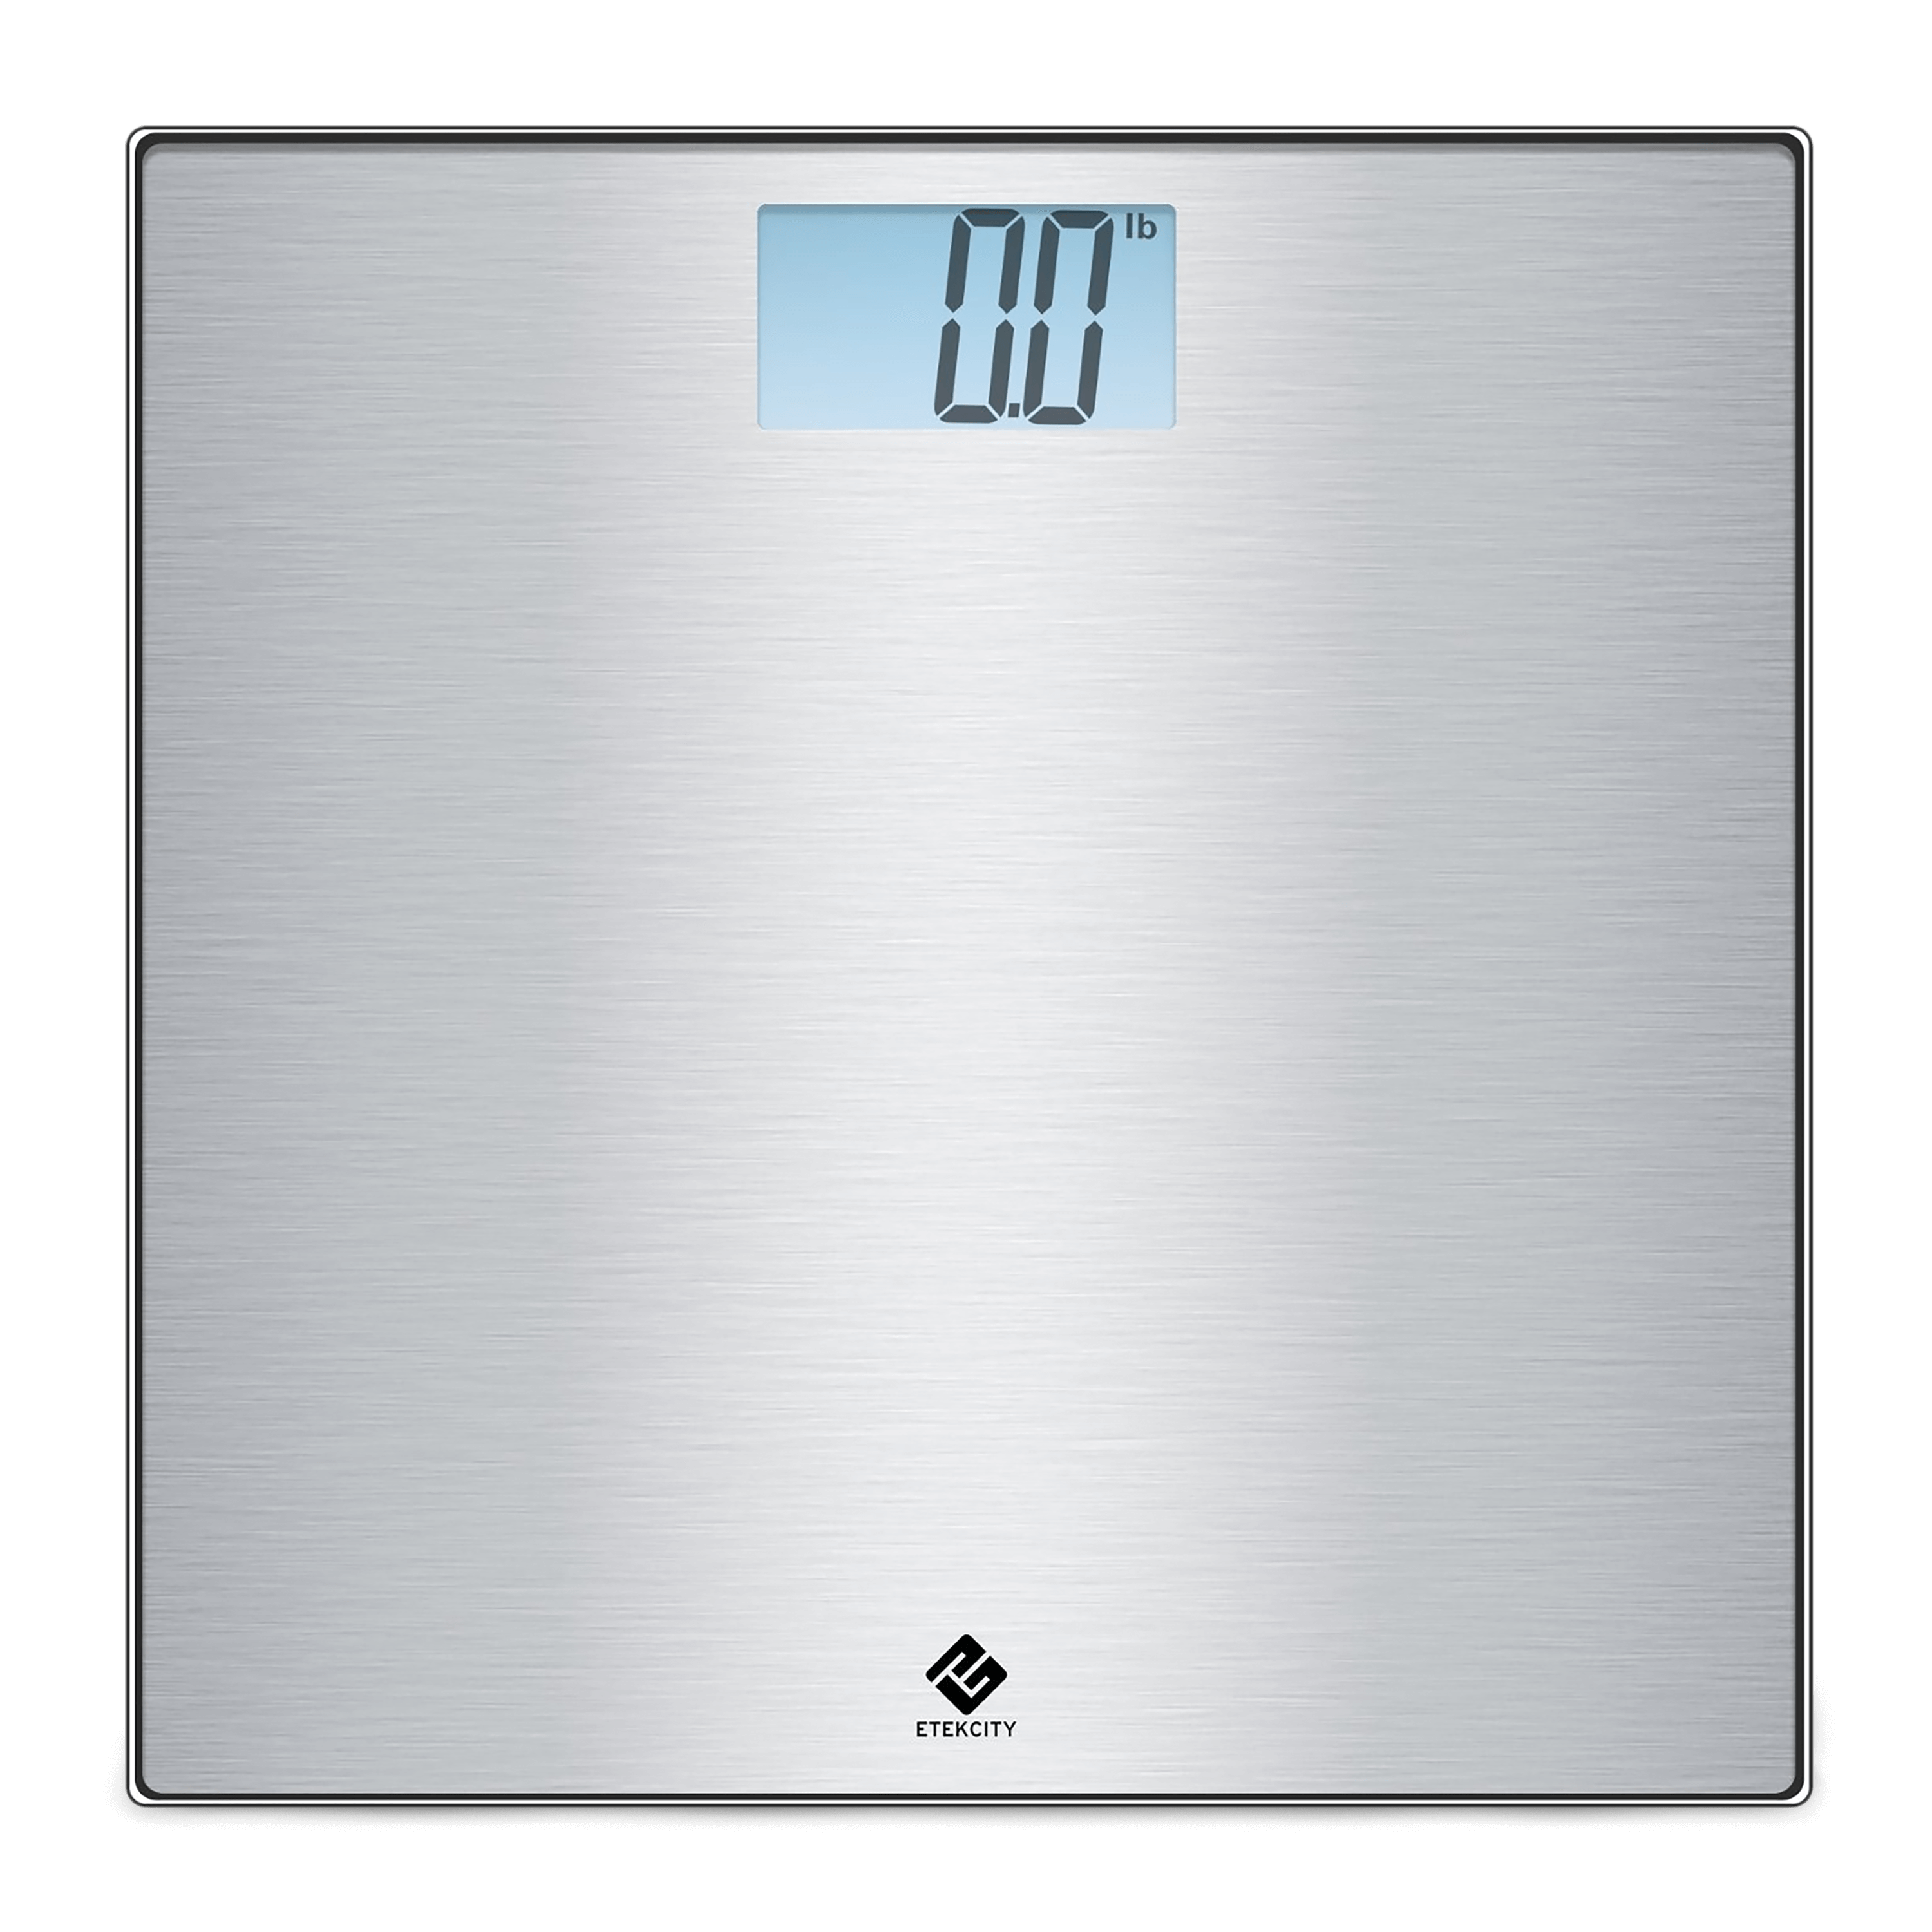 Triomph Smart Digital Body Weight Bathroom Scale with Step-On Technology, LCD Backlit Display, 400 lbs Capacity and Accurate Wei